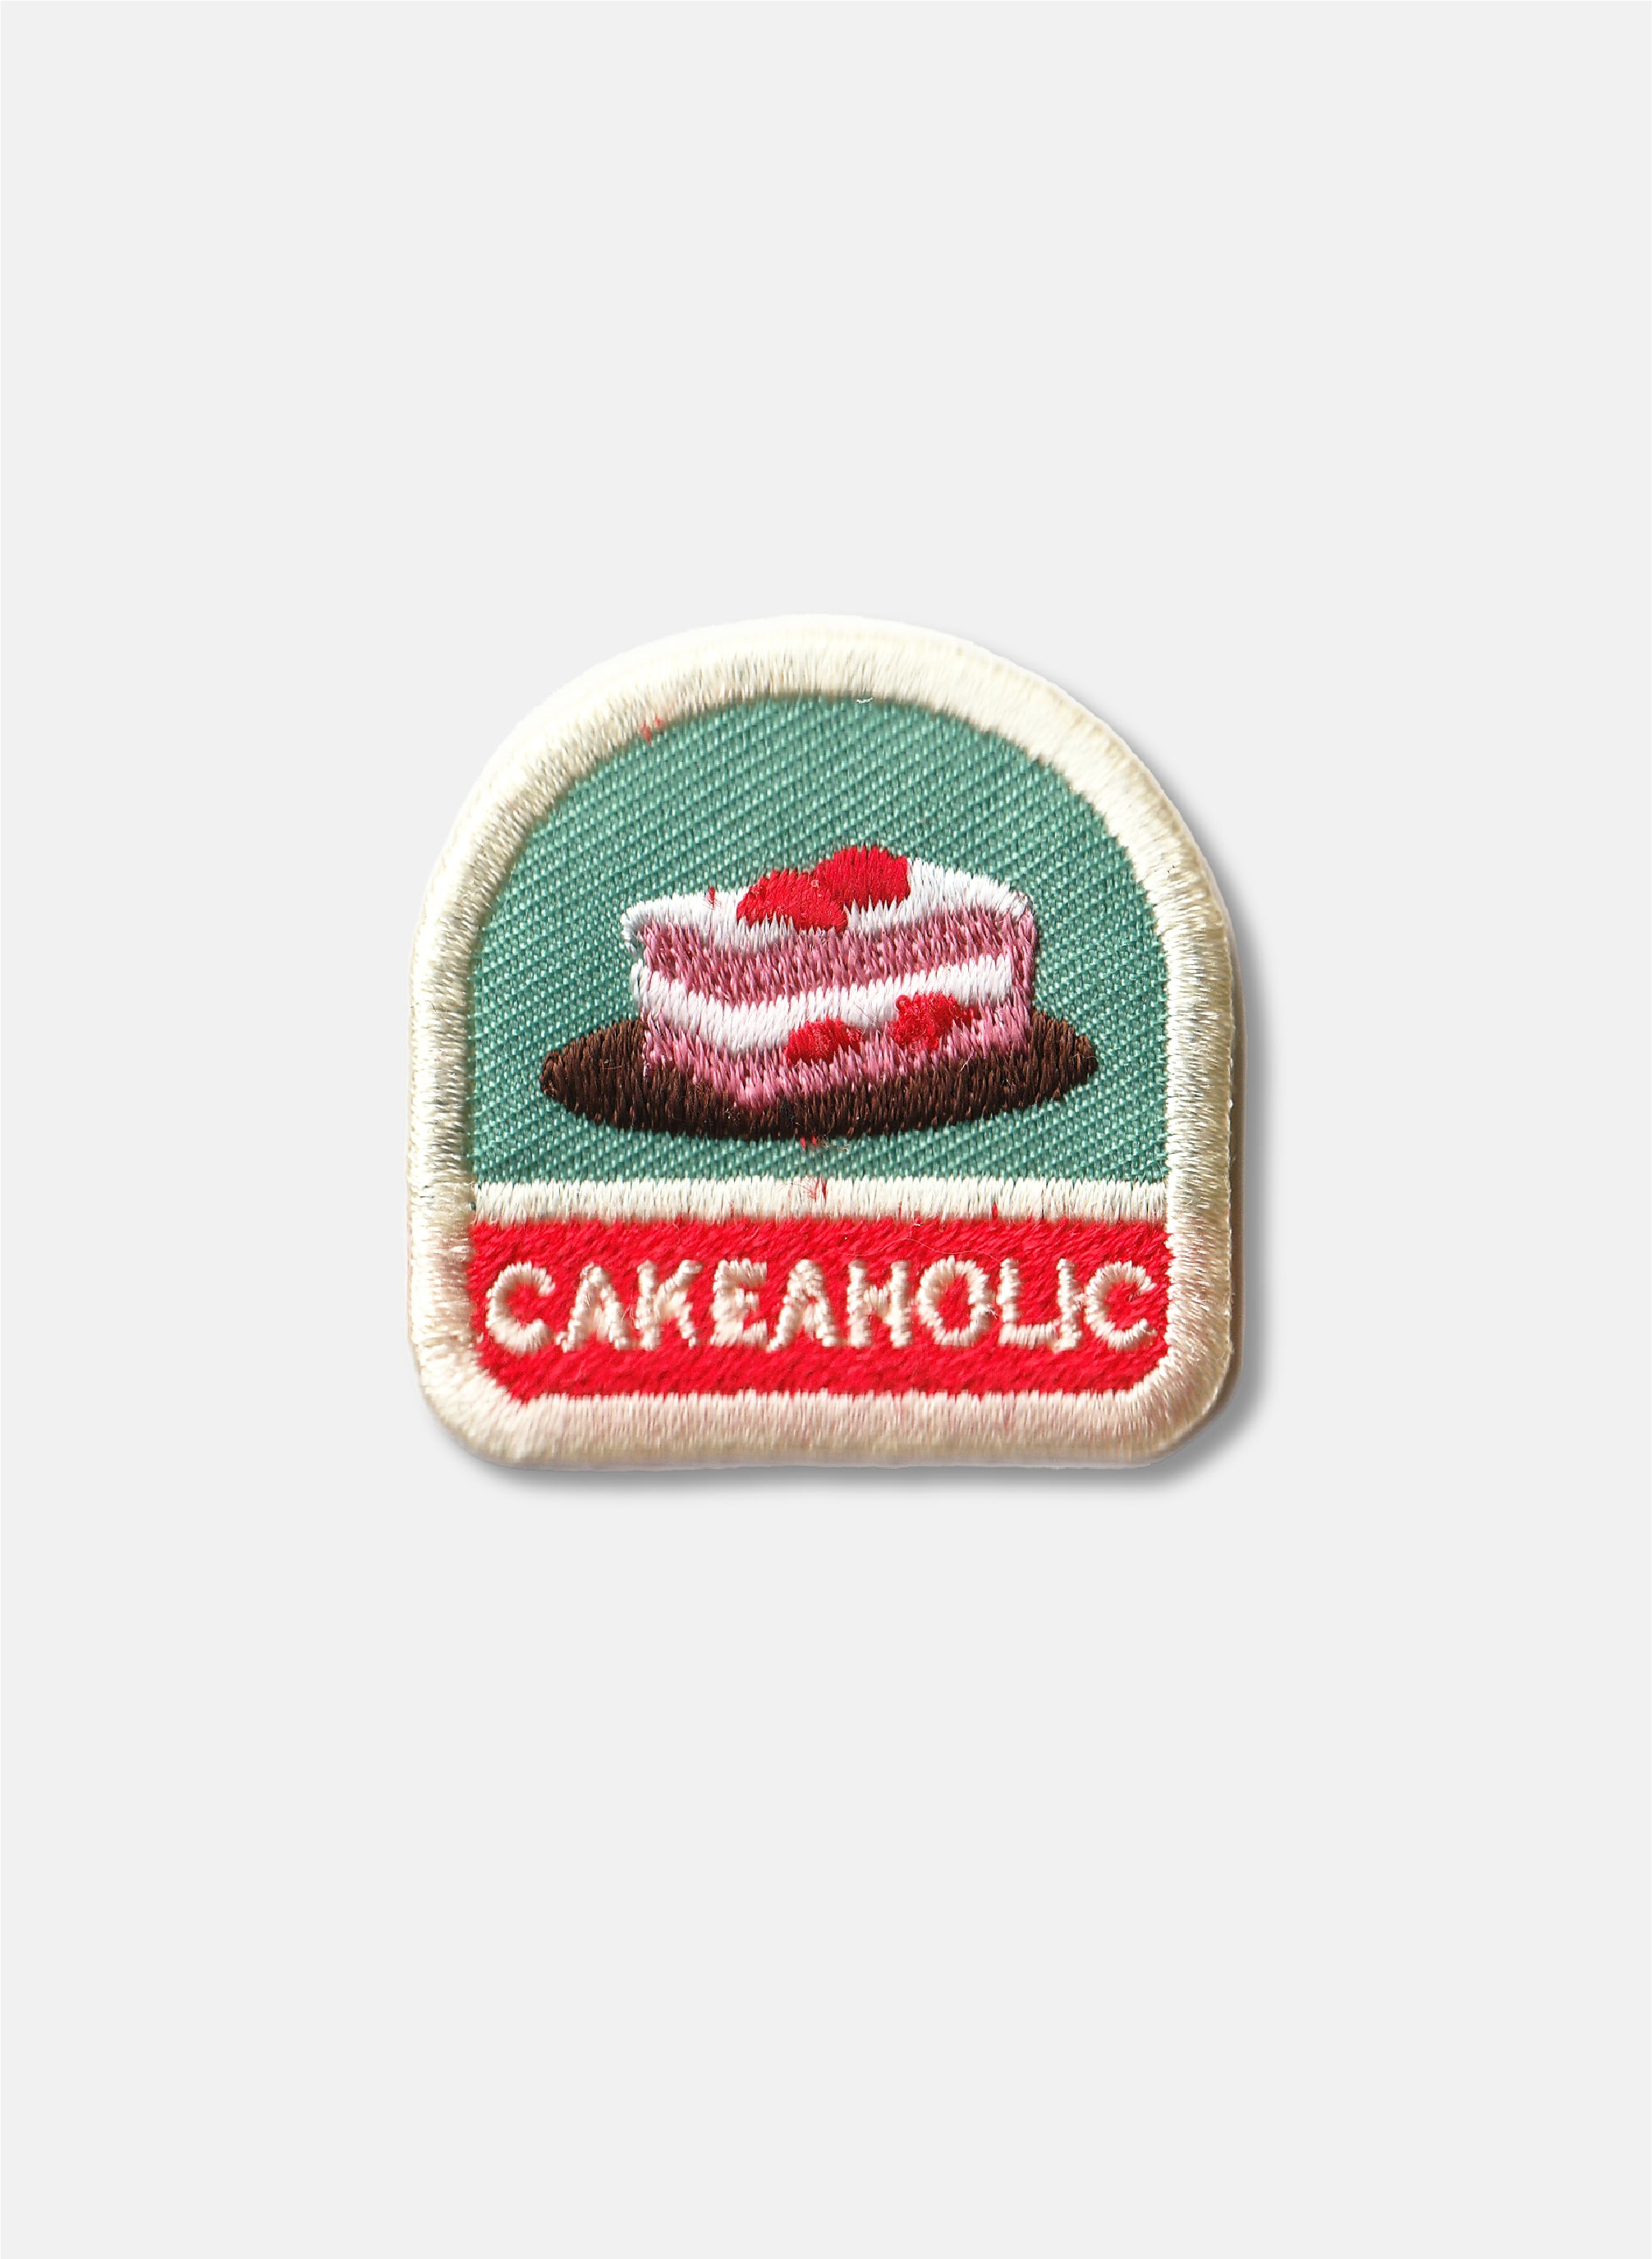 Cakeaholic Iron on Patch